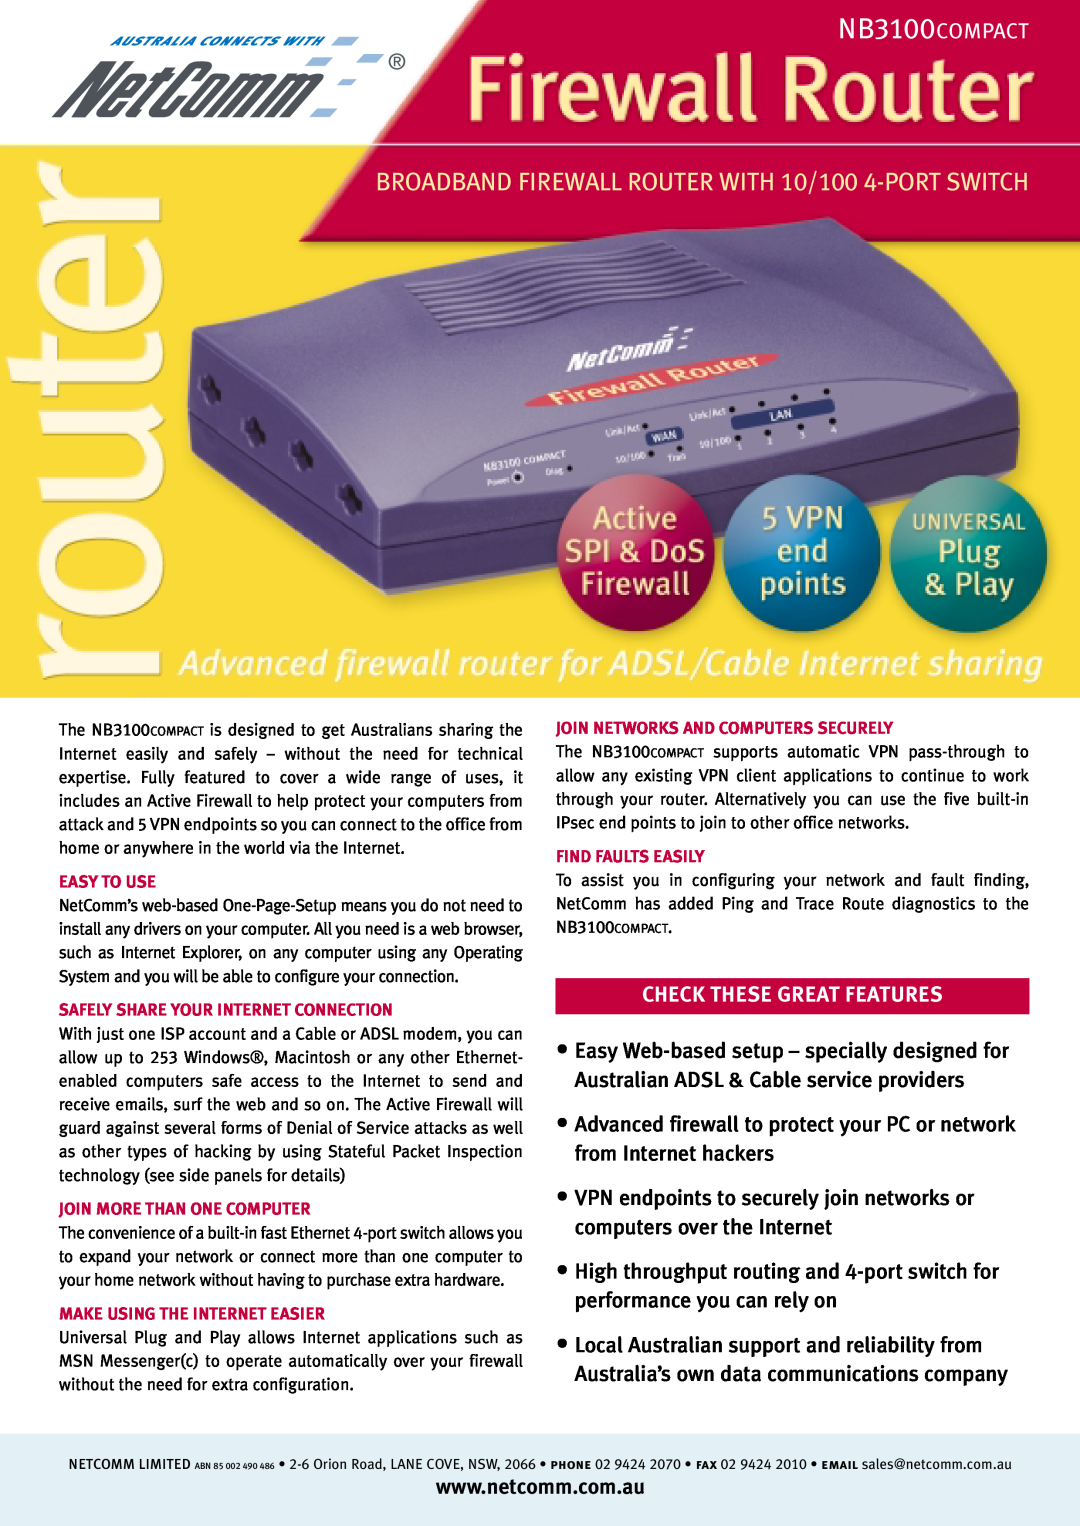 NetComm manual BROADBAND FIREWALL ROUTER WITH 10/100 4-PORT SWITCH, NB3100COMPACT, Check These Great Features 